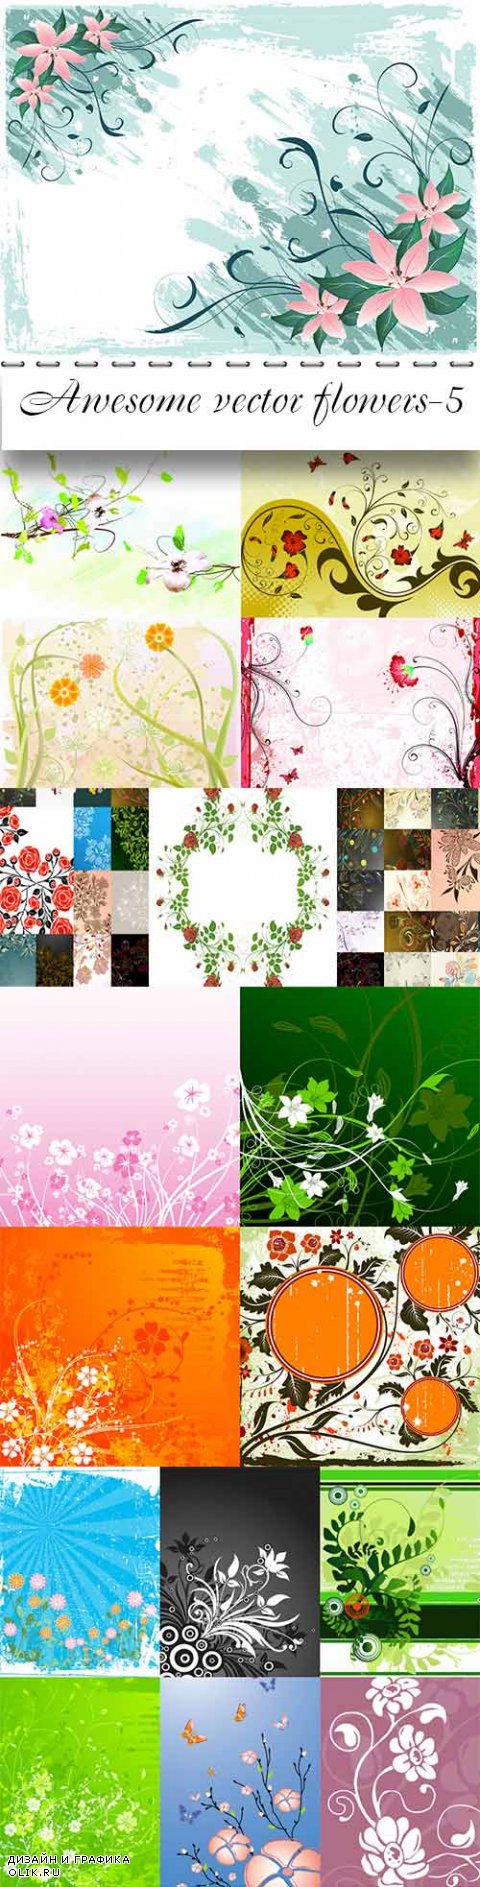 Awesome vector flowers-5